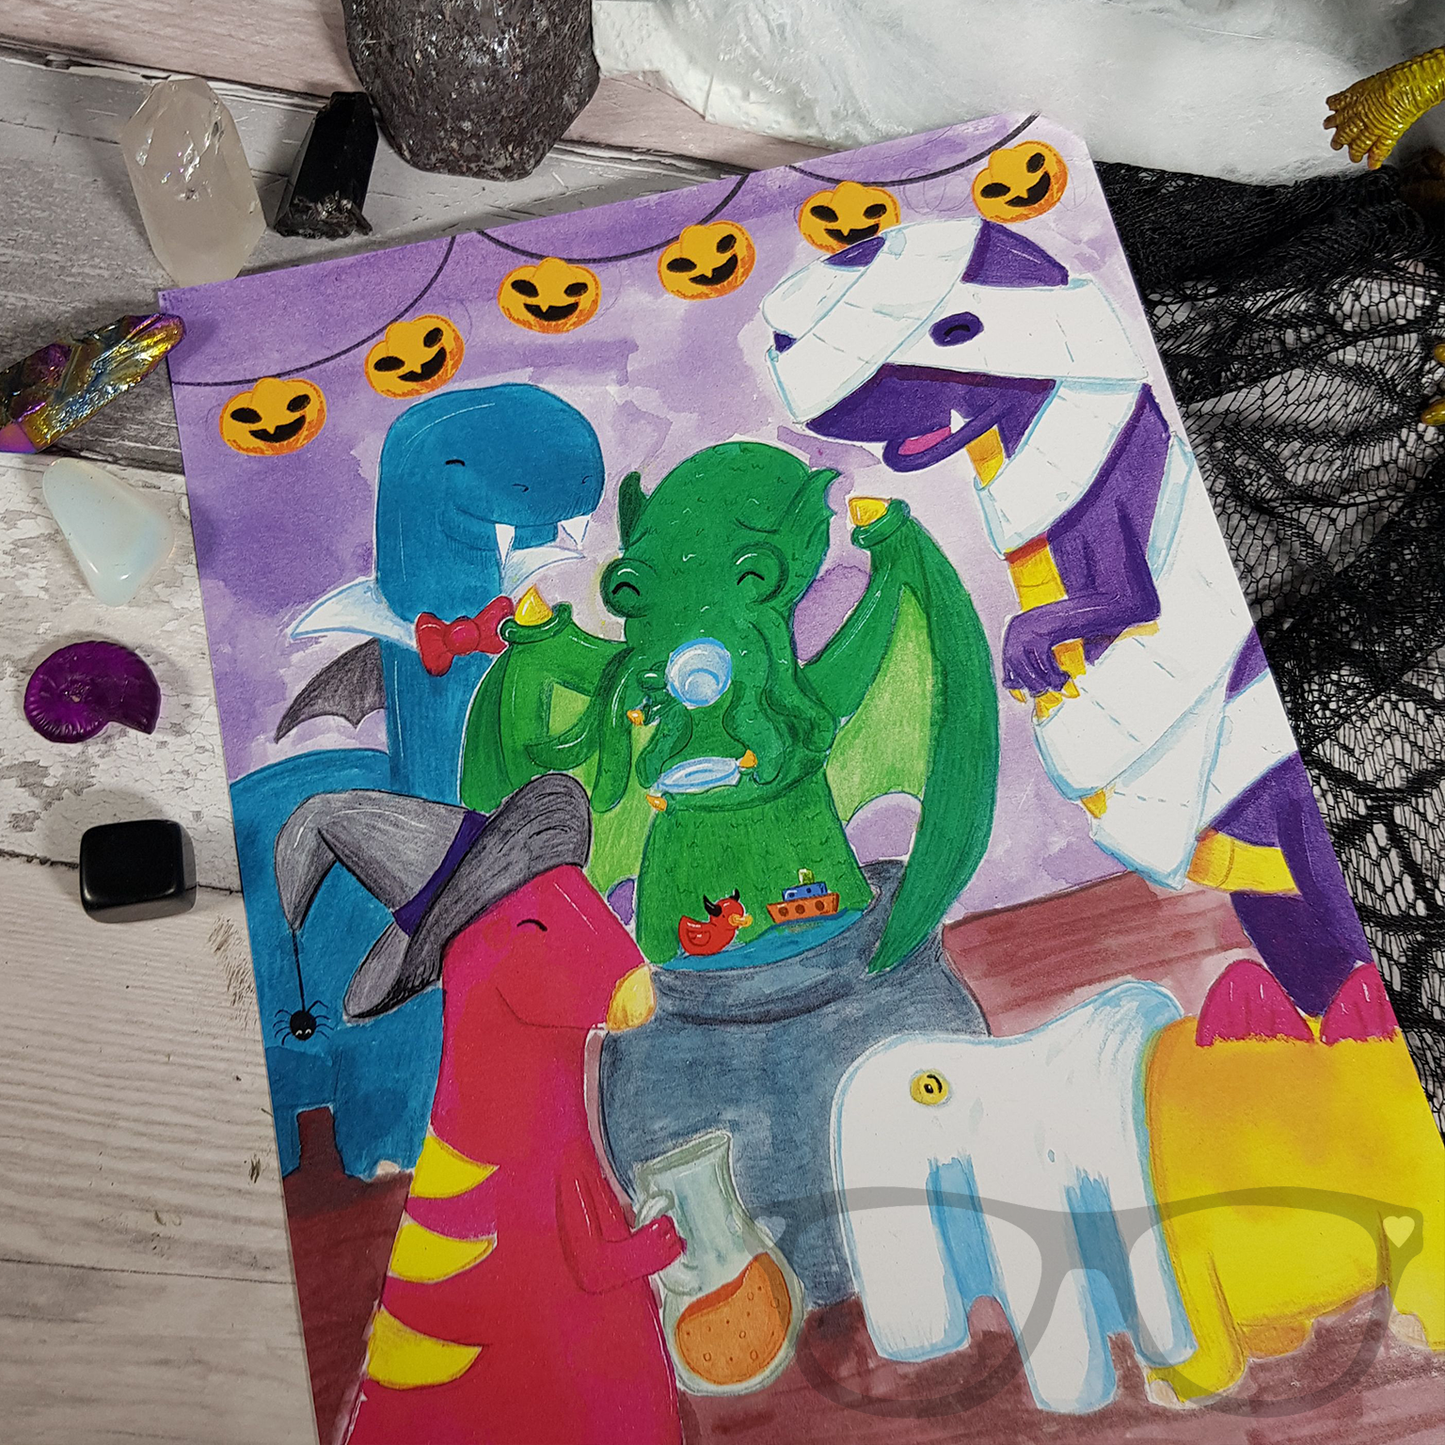 Close up of the A4 Art Print showing the dinosaurs enjoying their spooky party. These A4 sized prints are ideal for displaying in kid's bedrooms, offices or classrooms.